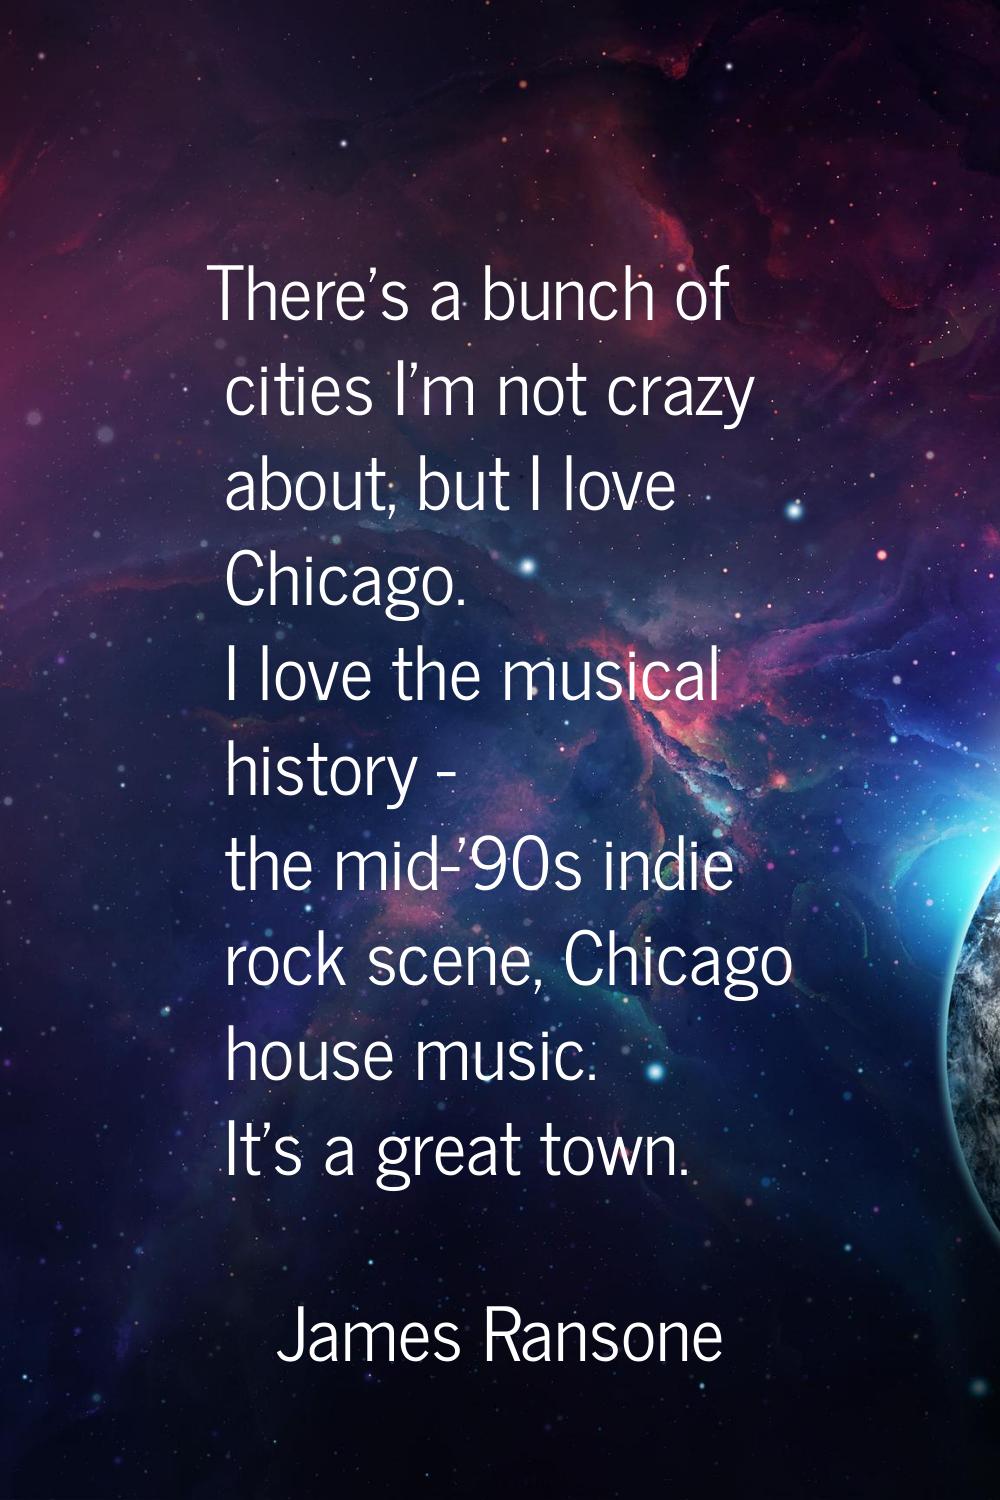 There's a bunch of cities I'm not crazy about, but I love Chicago. I love the musical history - the